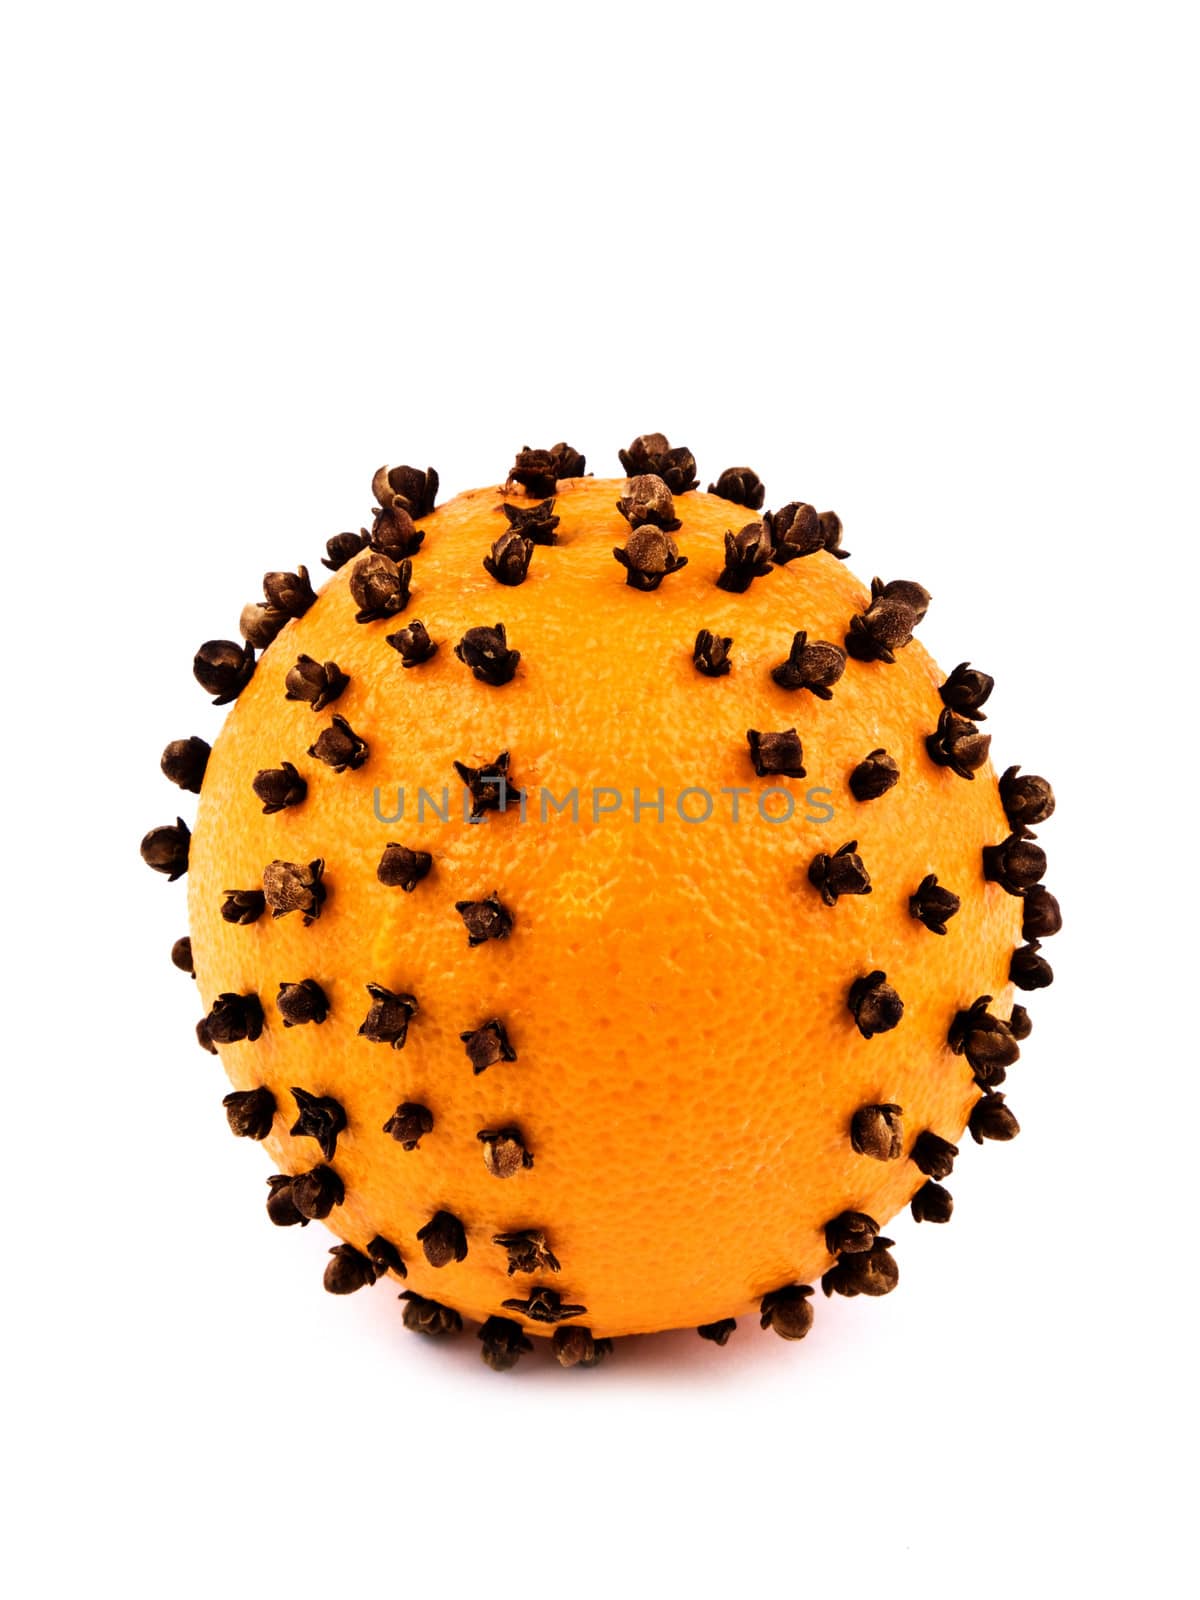 Aromatic Christmas orange with cloves on white background